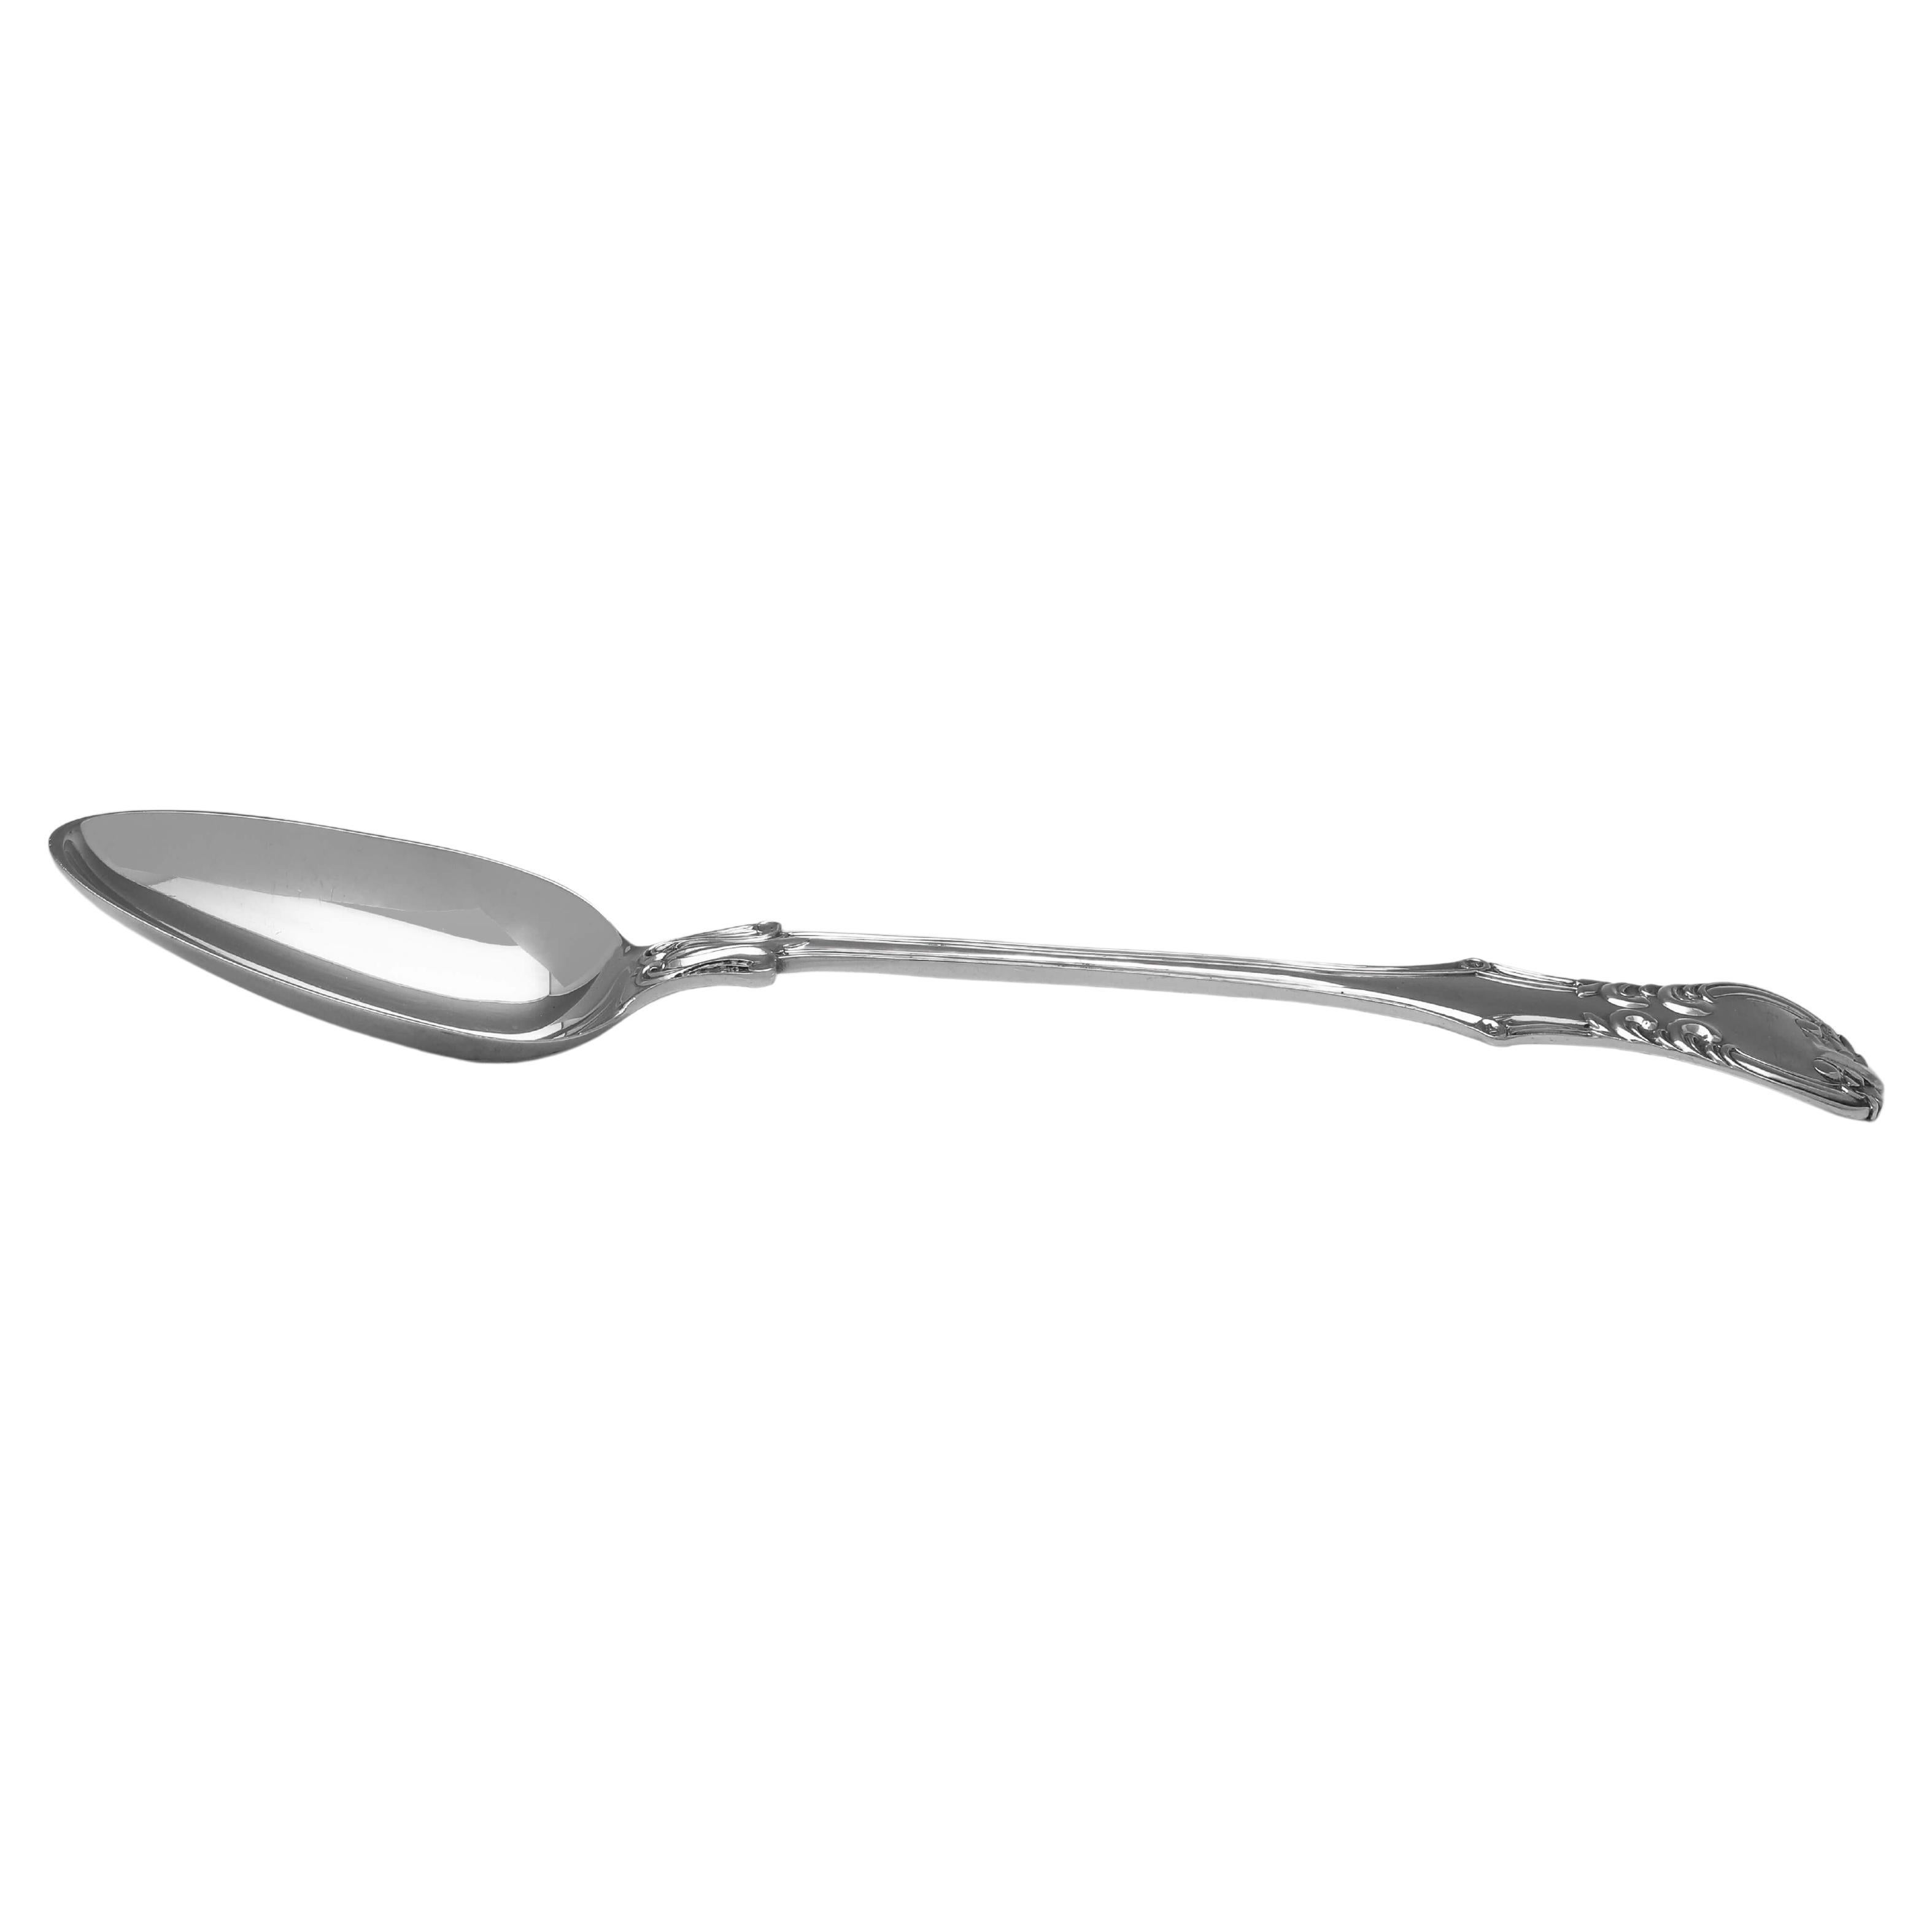 Sterling Silver 'Victoria' Pattern Basting Spoon - London 1855